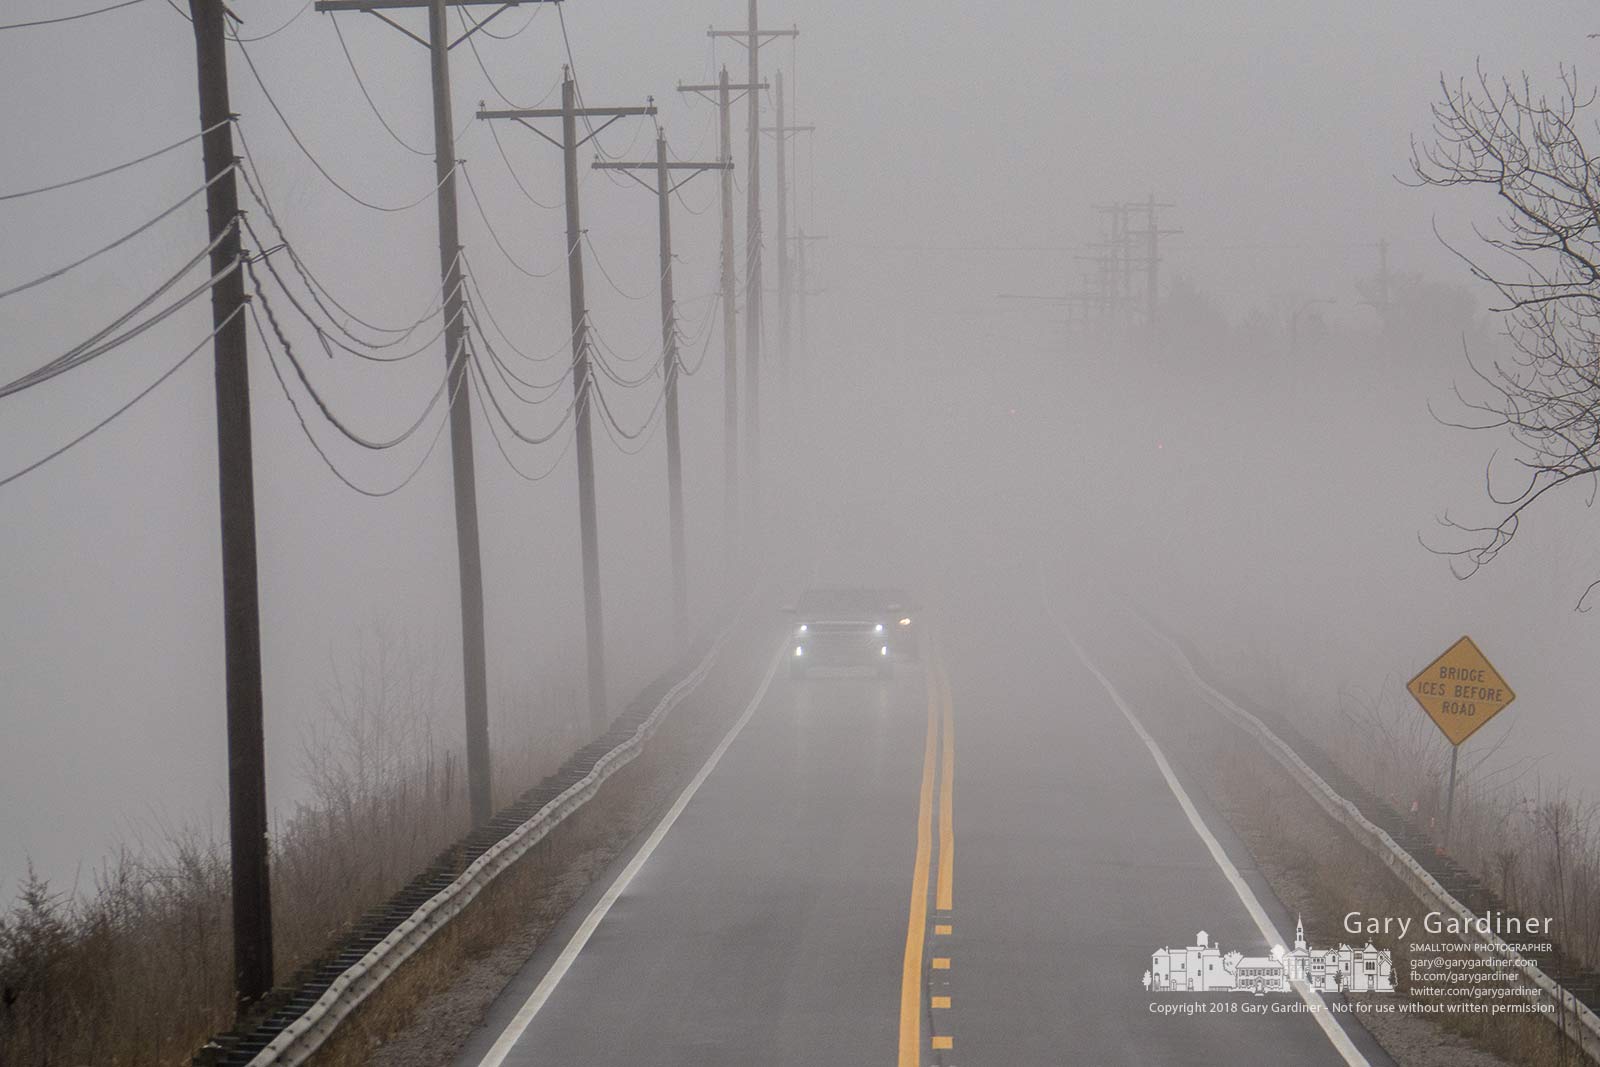 Drivers in early afternoon commuter traffic navigate their way through heavy fog across the Smothers Road bridge. My Final Photo for March 28, 2019.